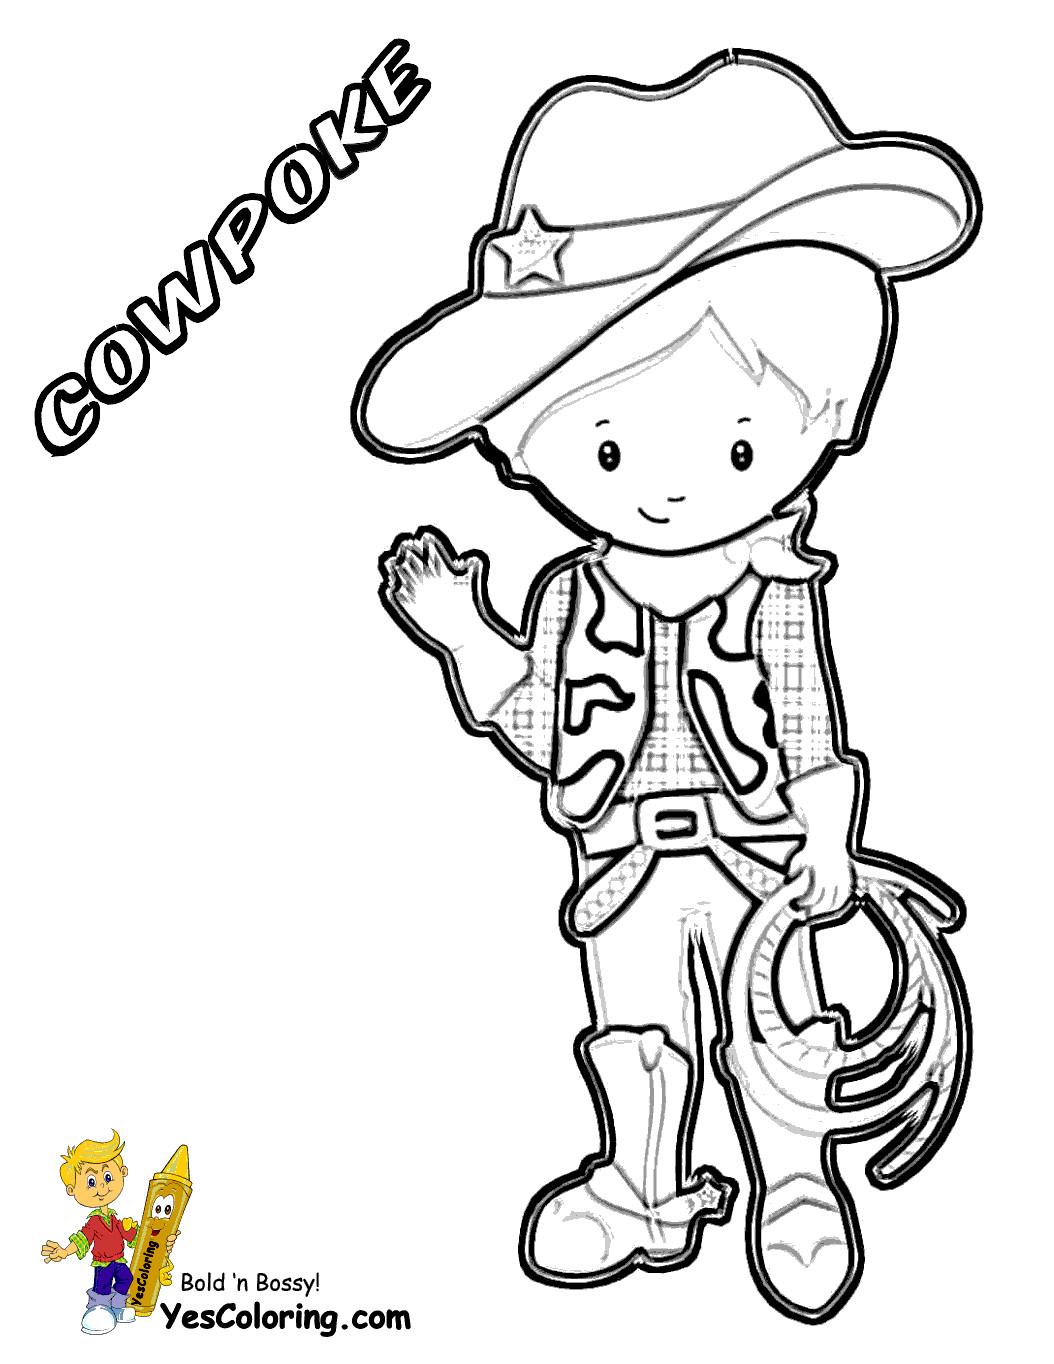 Cowboy And Cowgirl Coloring Pages
 Ride em Cowboy Coloring Free Coloring For Kids